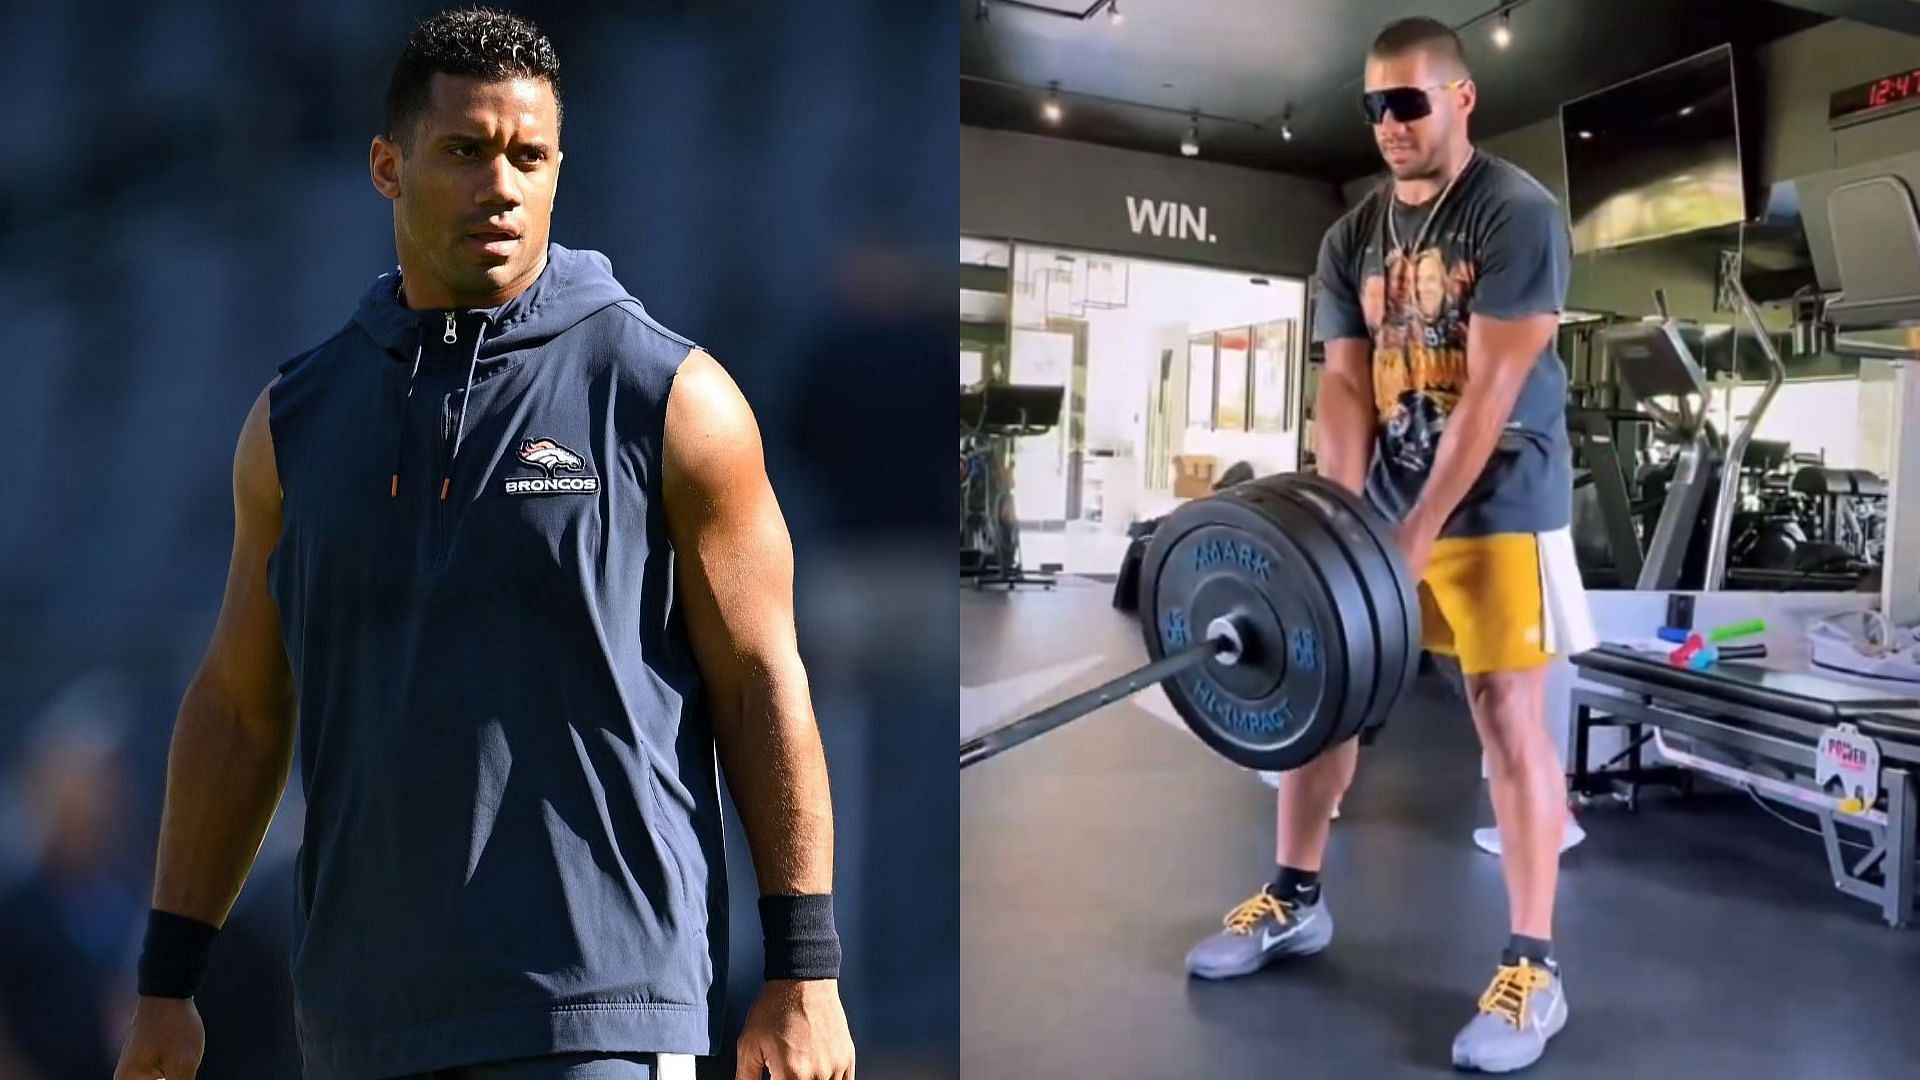 Russell Wilson works out indoors while wearing sunglasses